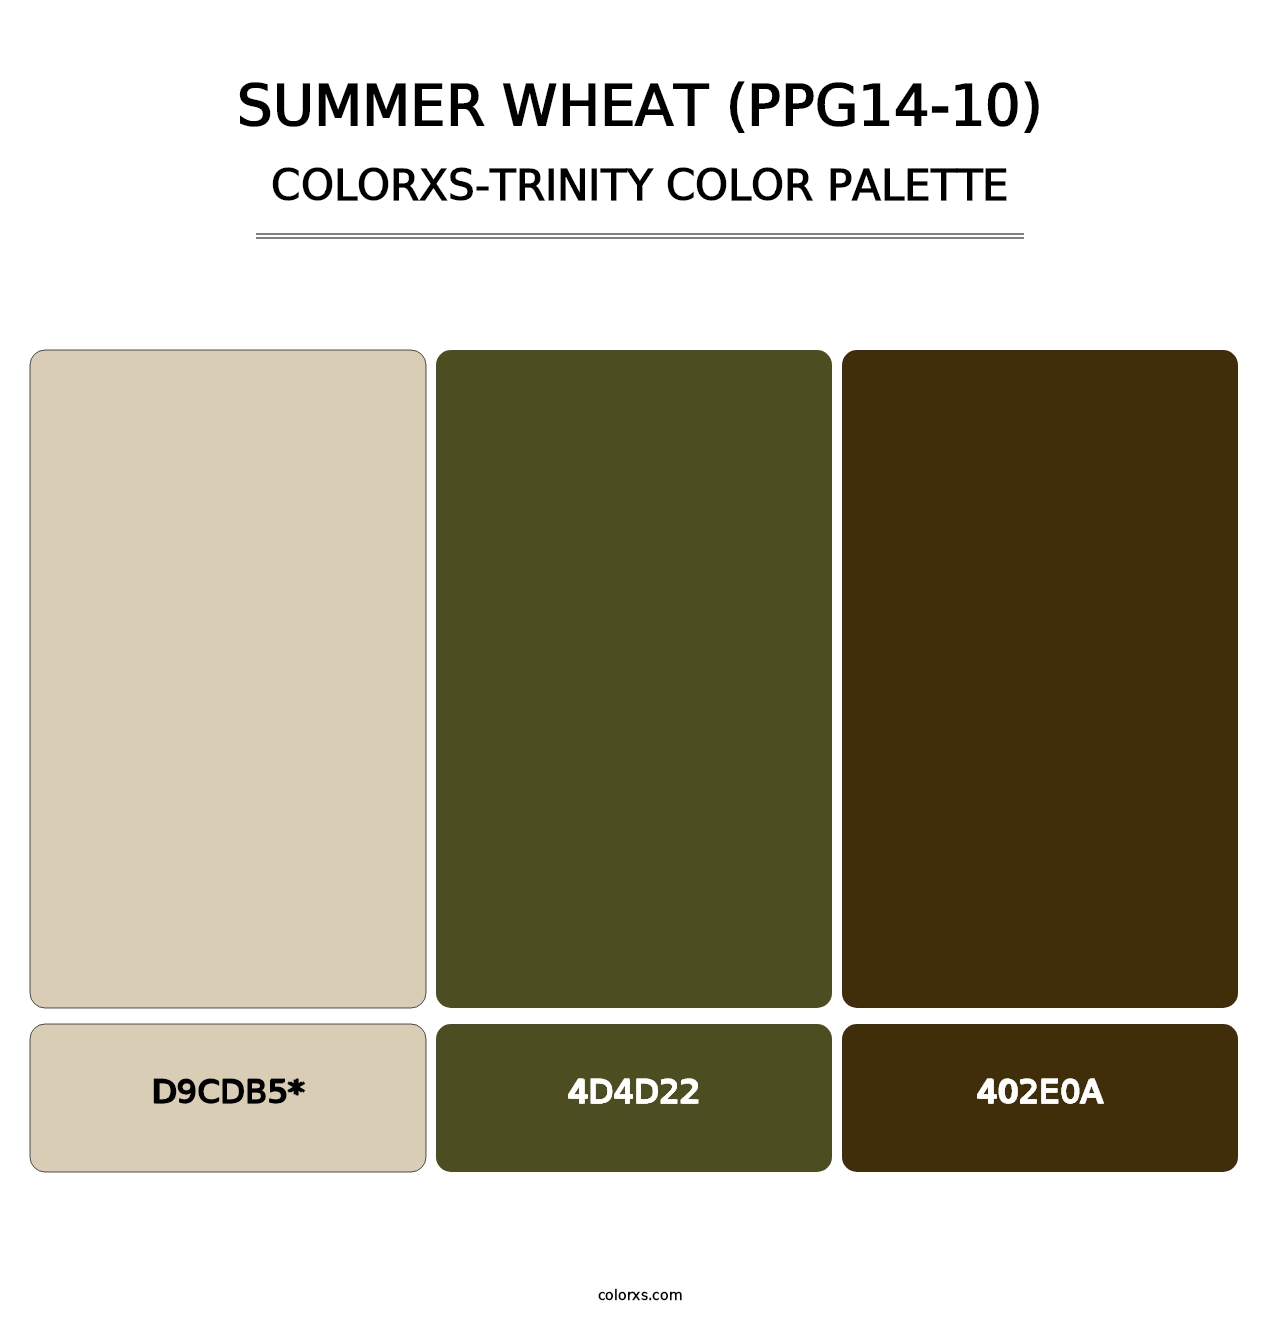 Summer Wheat (PPG14-10) - Colorxs Trinity Palette